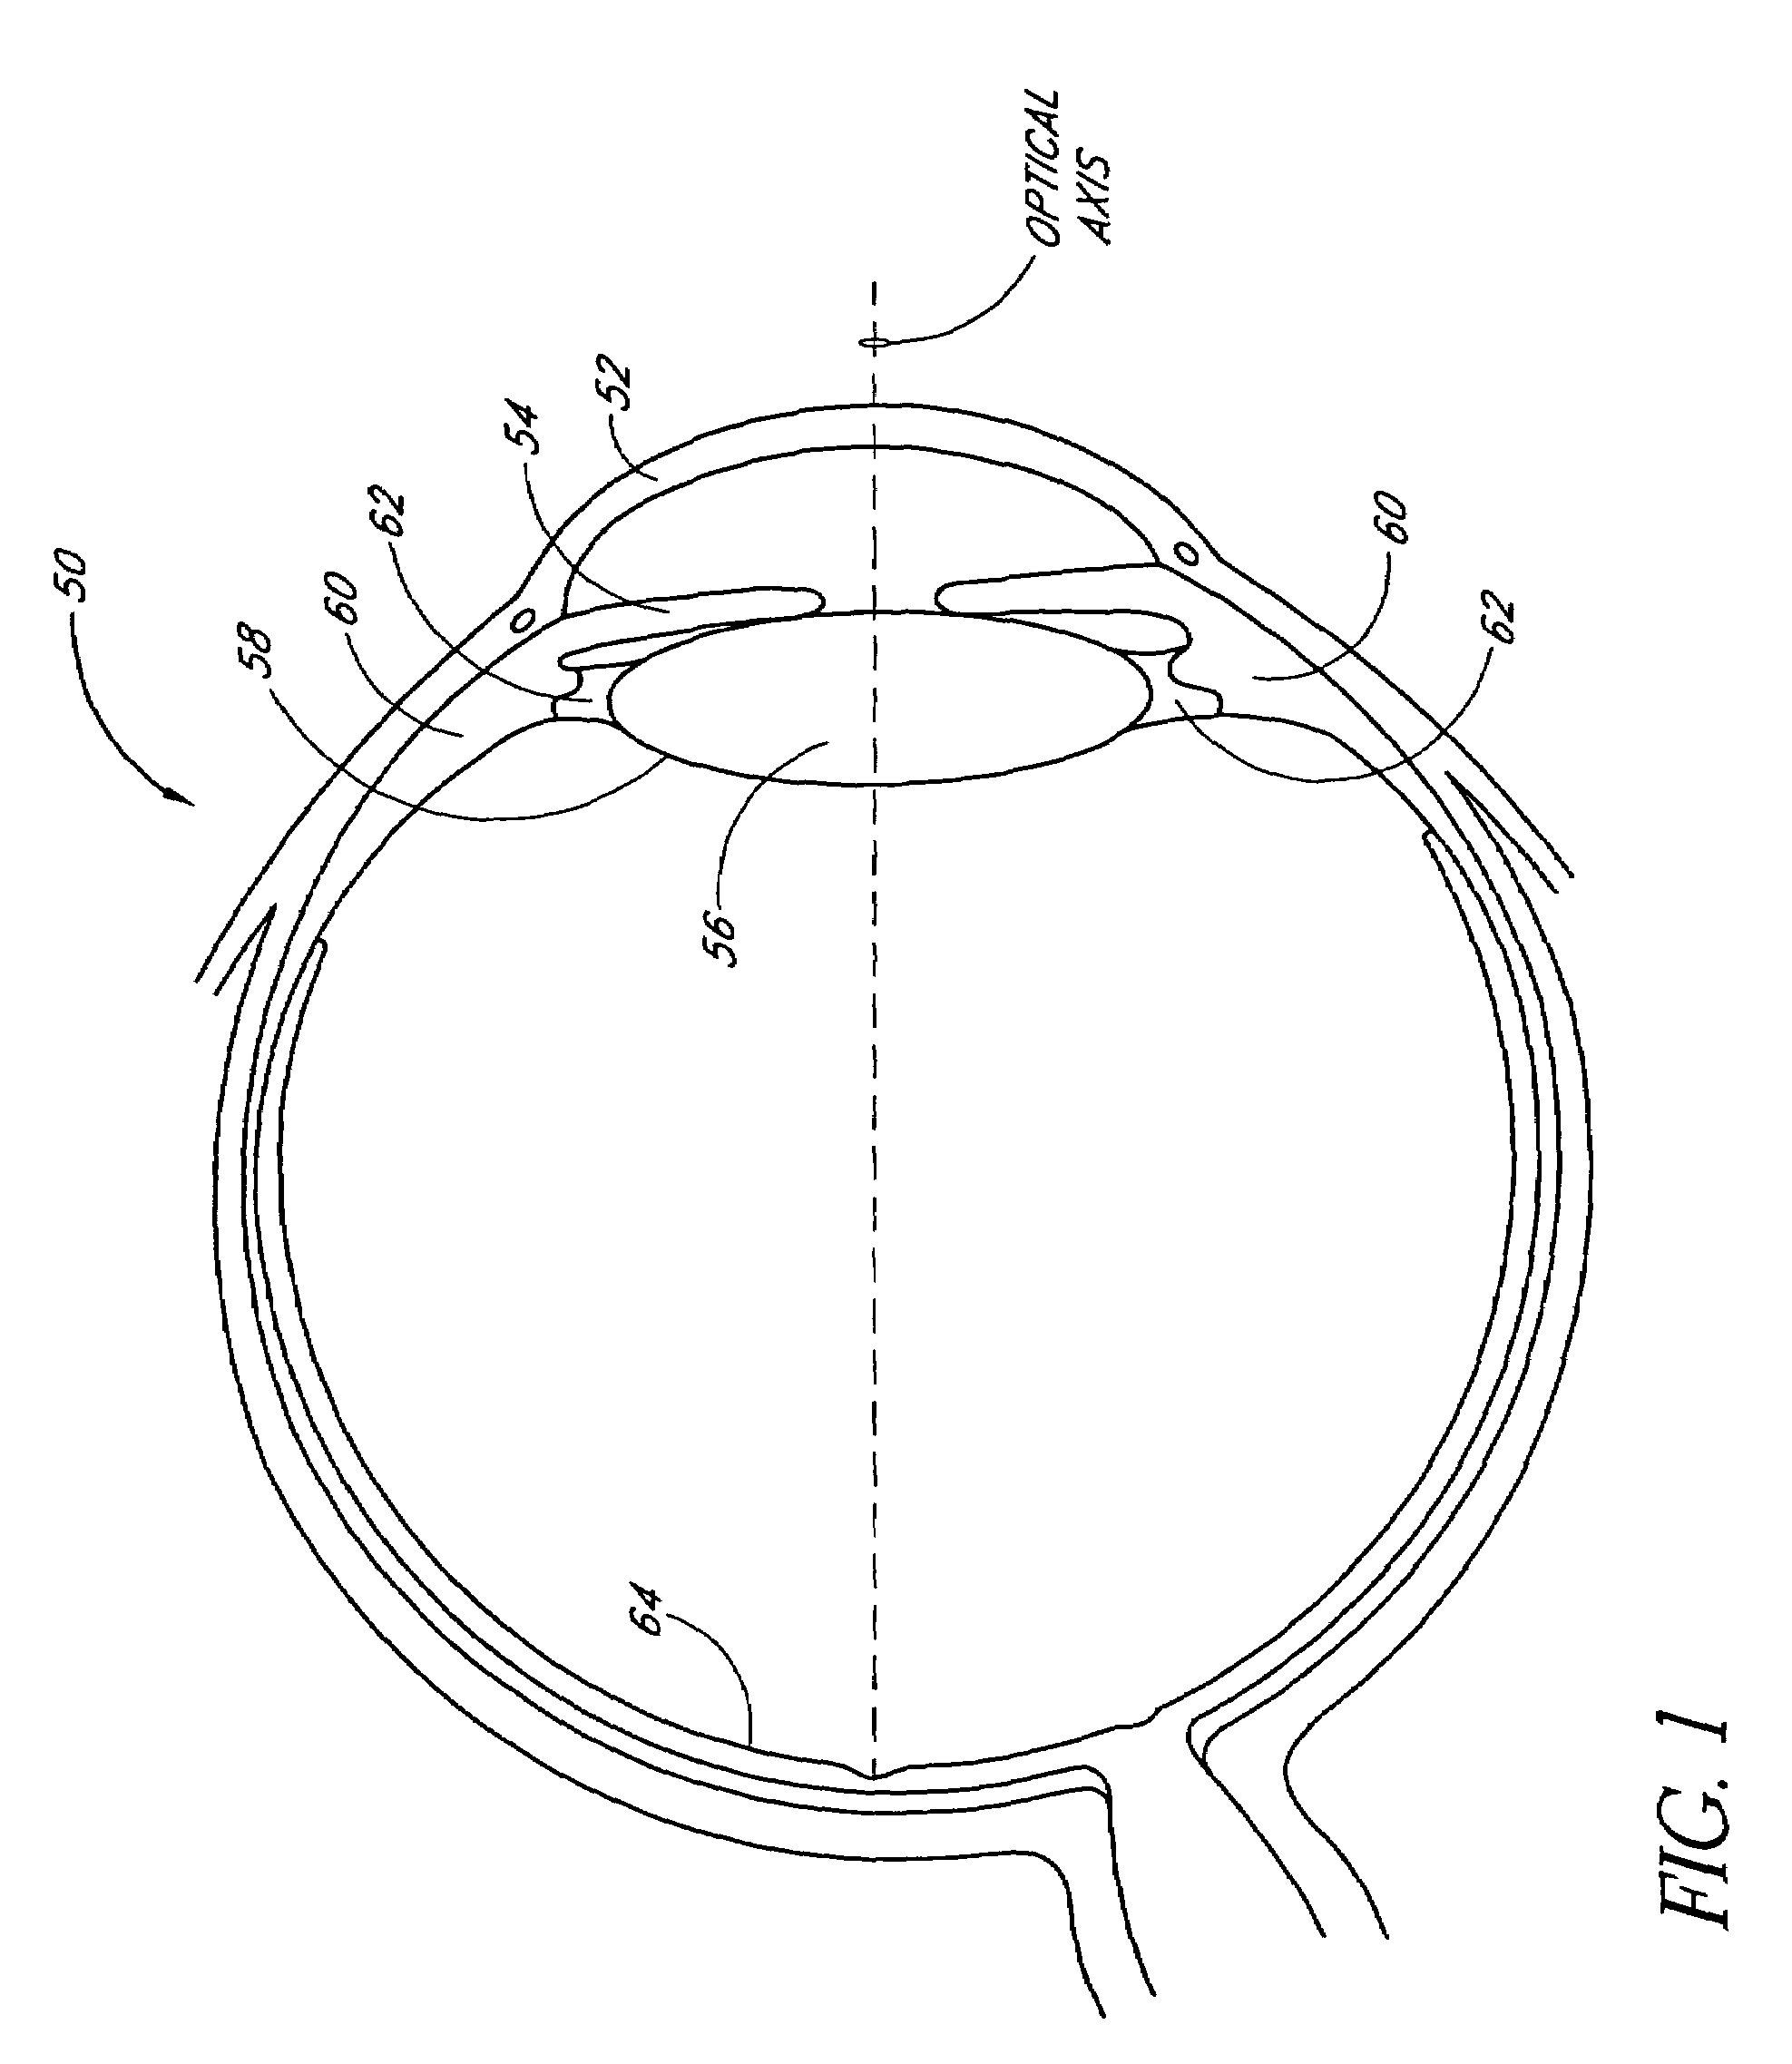 Single-piece accommodating intraocular lens system